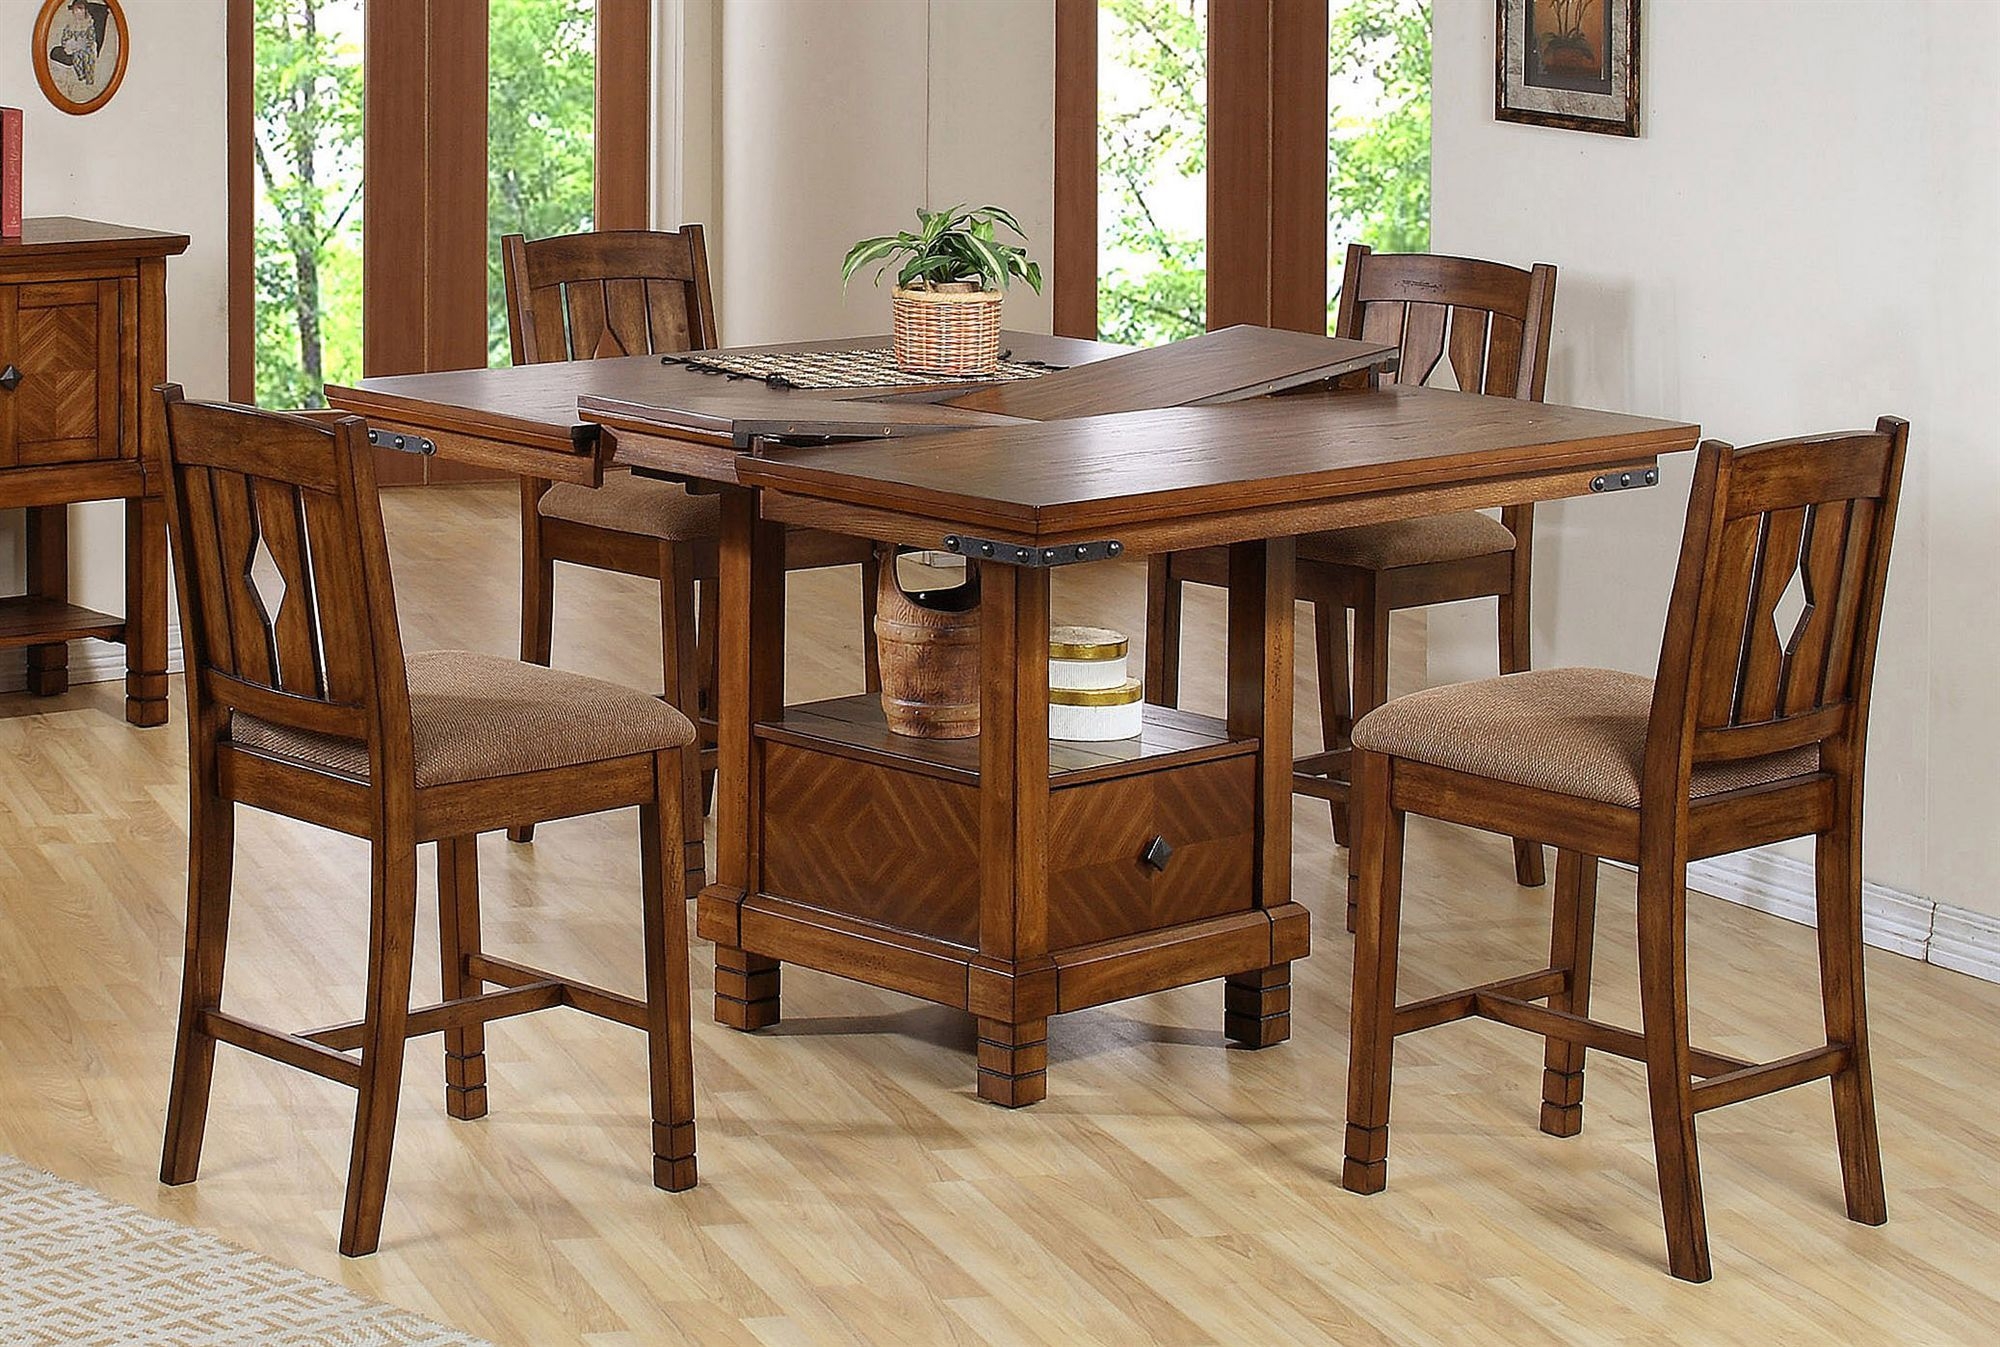 Butterfly leaf kitchen table 6